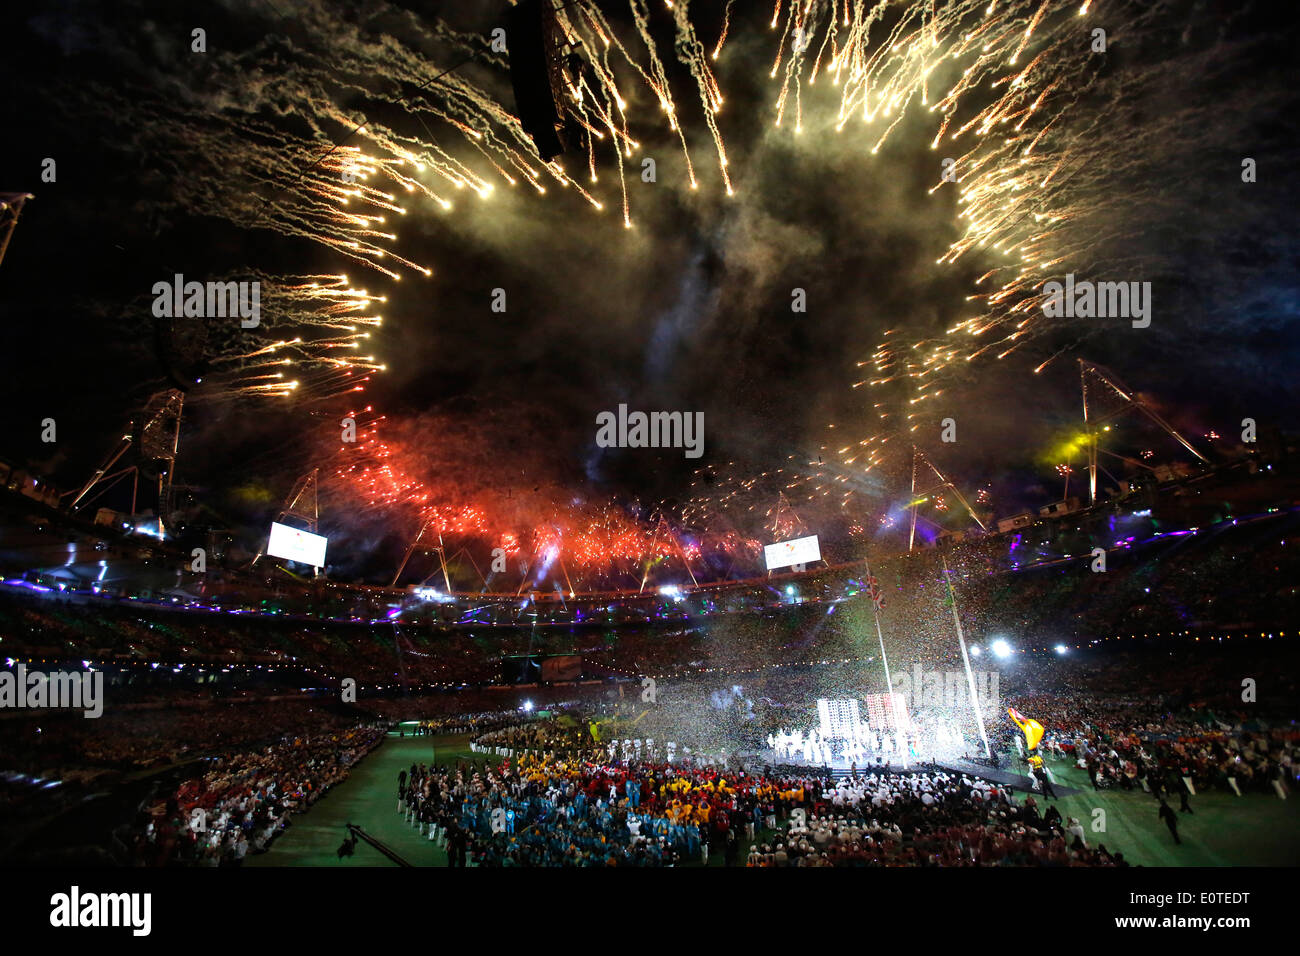 Fireworks at the Olympic Stadium during the closing ceremony of the London 2012 Paralympic Games, London, Britain, 09 September 2012. Stock Photo